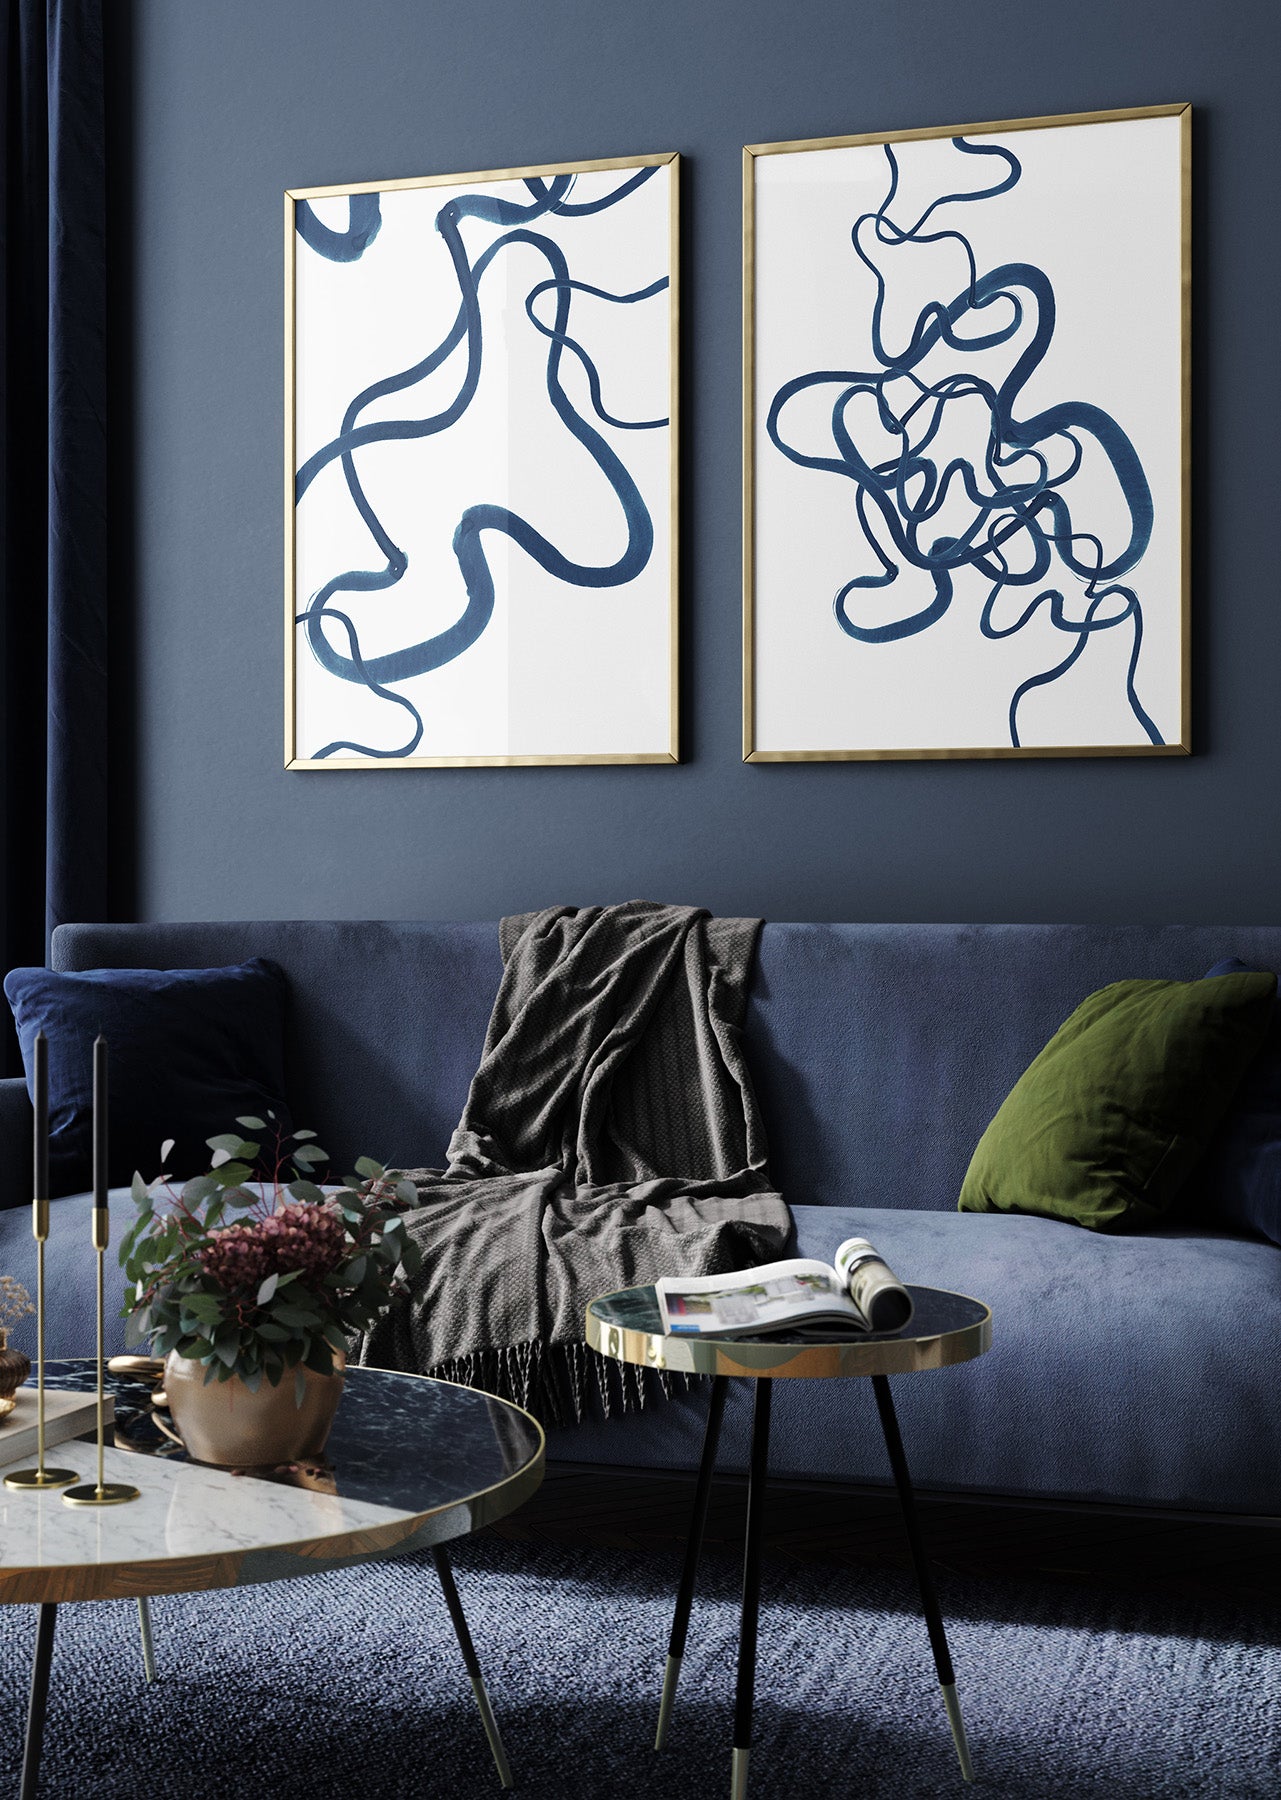 Blue Squiggles (2) Abstract Wall Art Print